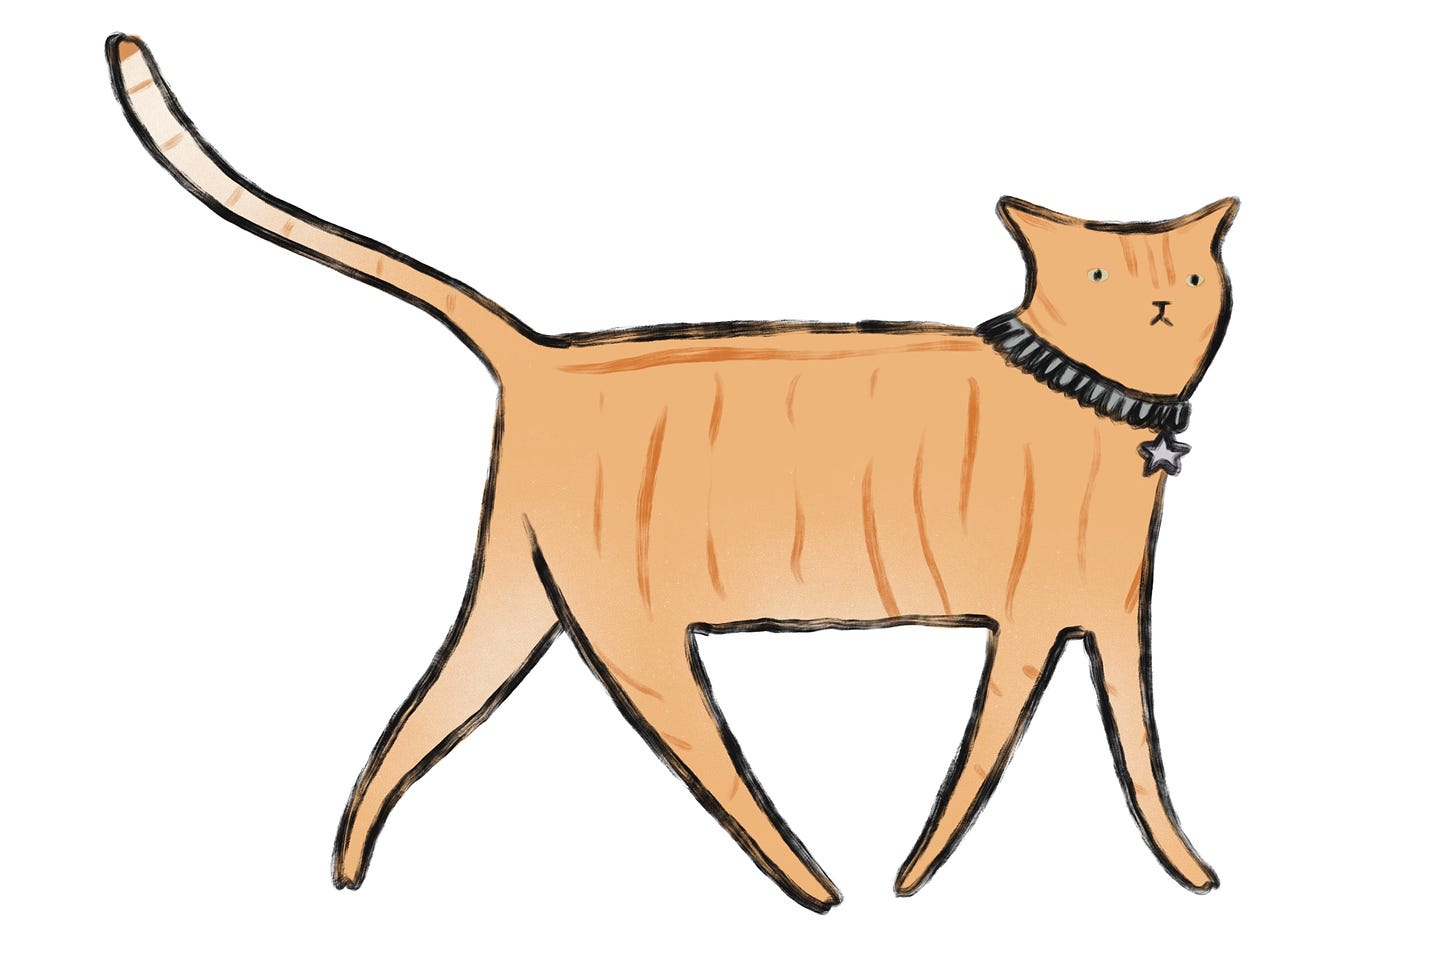 An orange tabby cat with long legs and a star-shaped tag on his collar